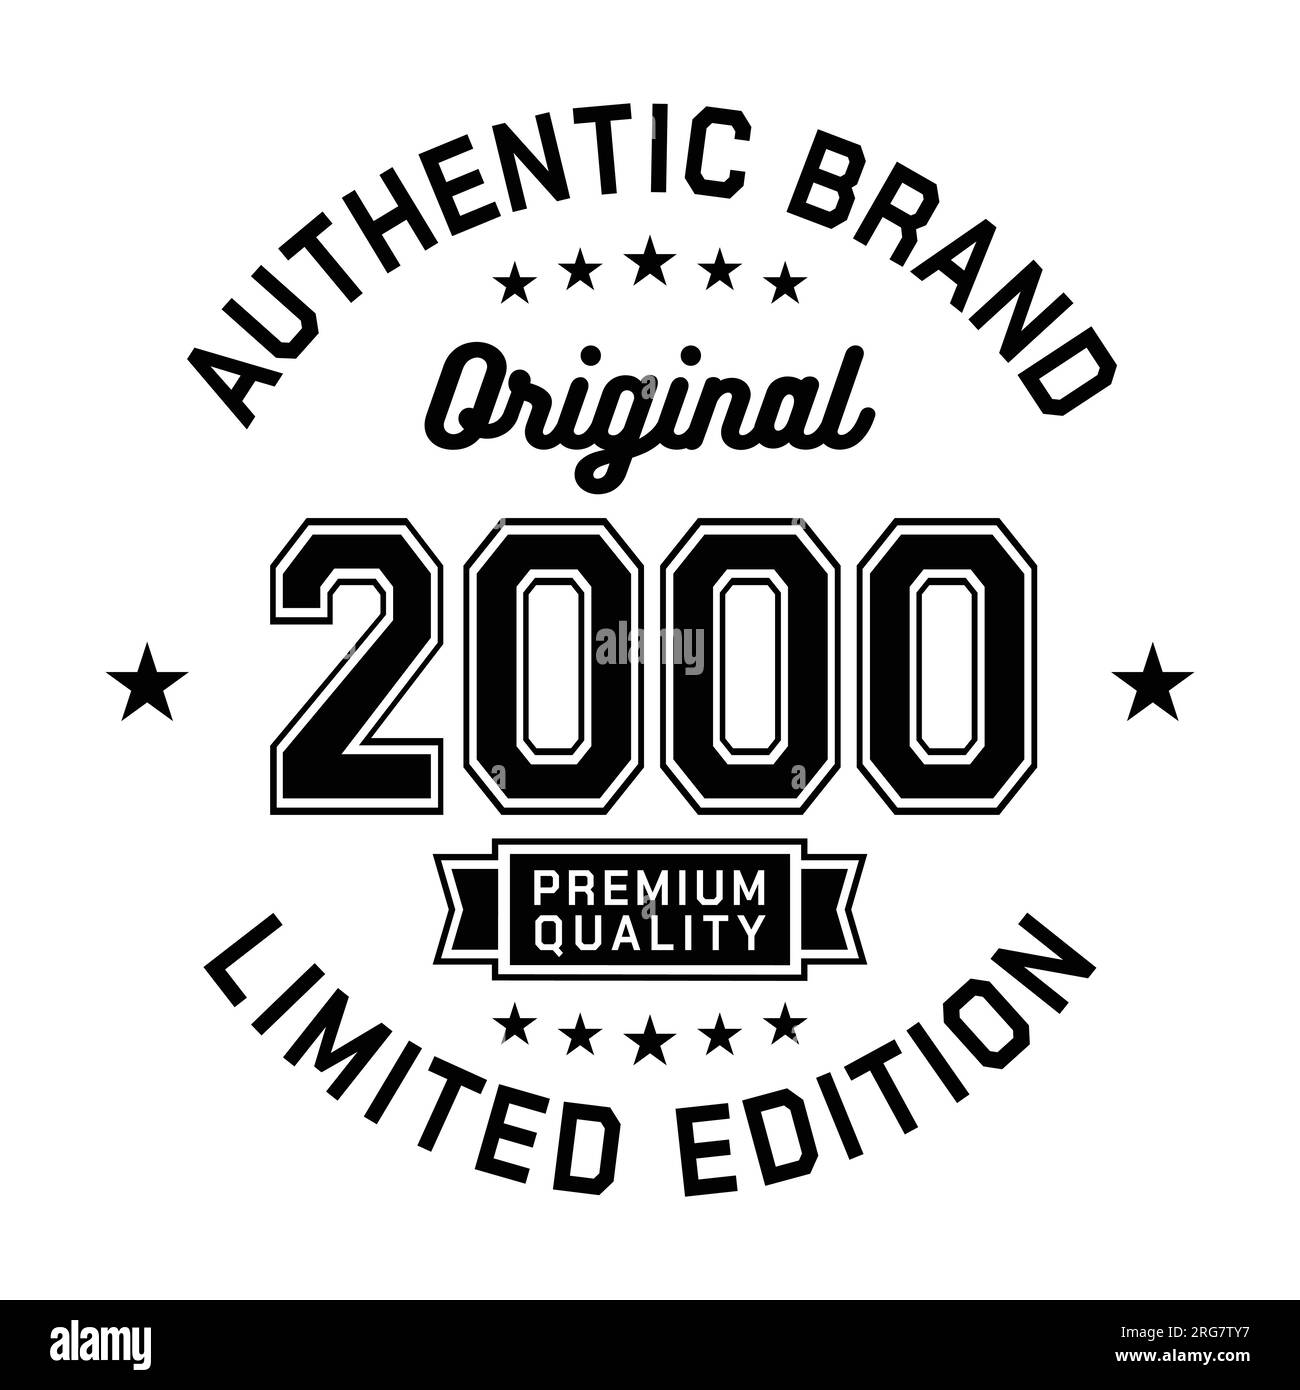 2000 Authentic brand. Apparel fashion design. Graphic design for t-shirt. Vector and illustration. Stock Vector